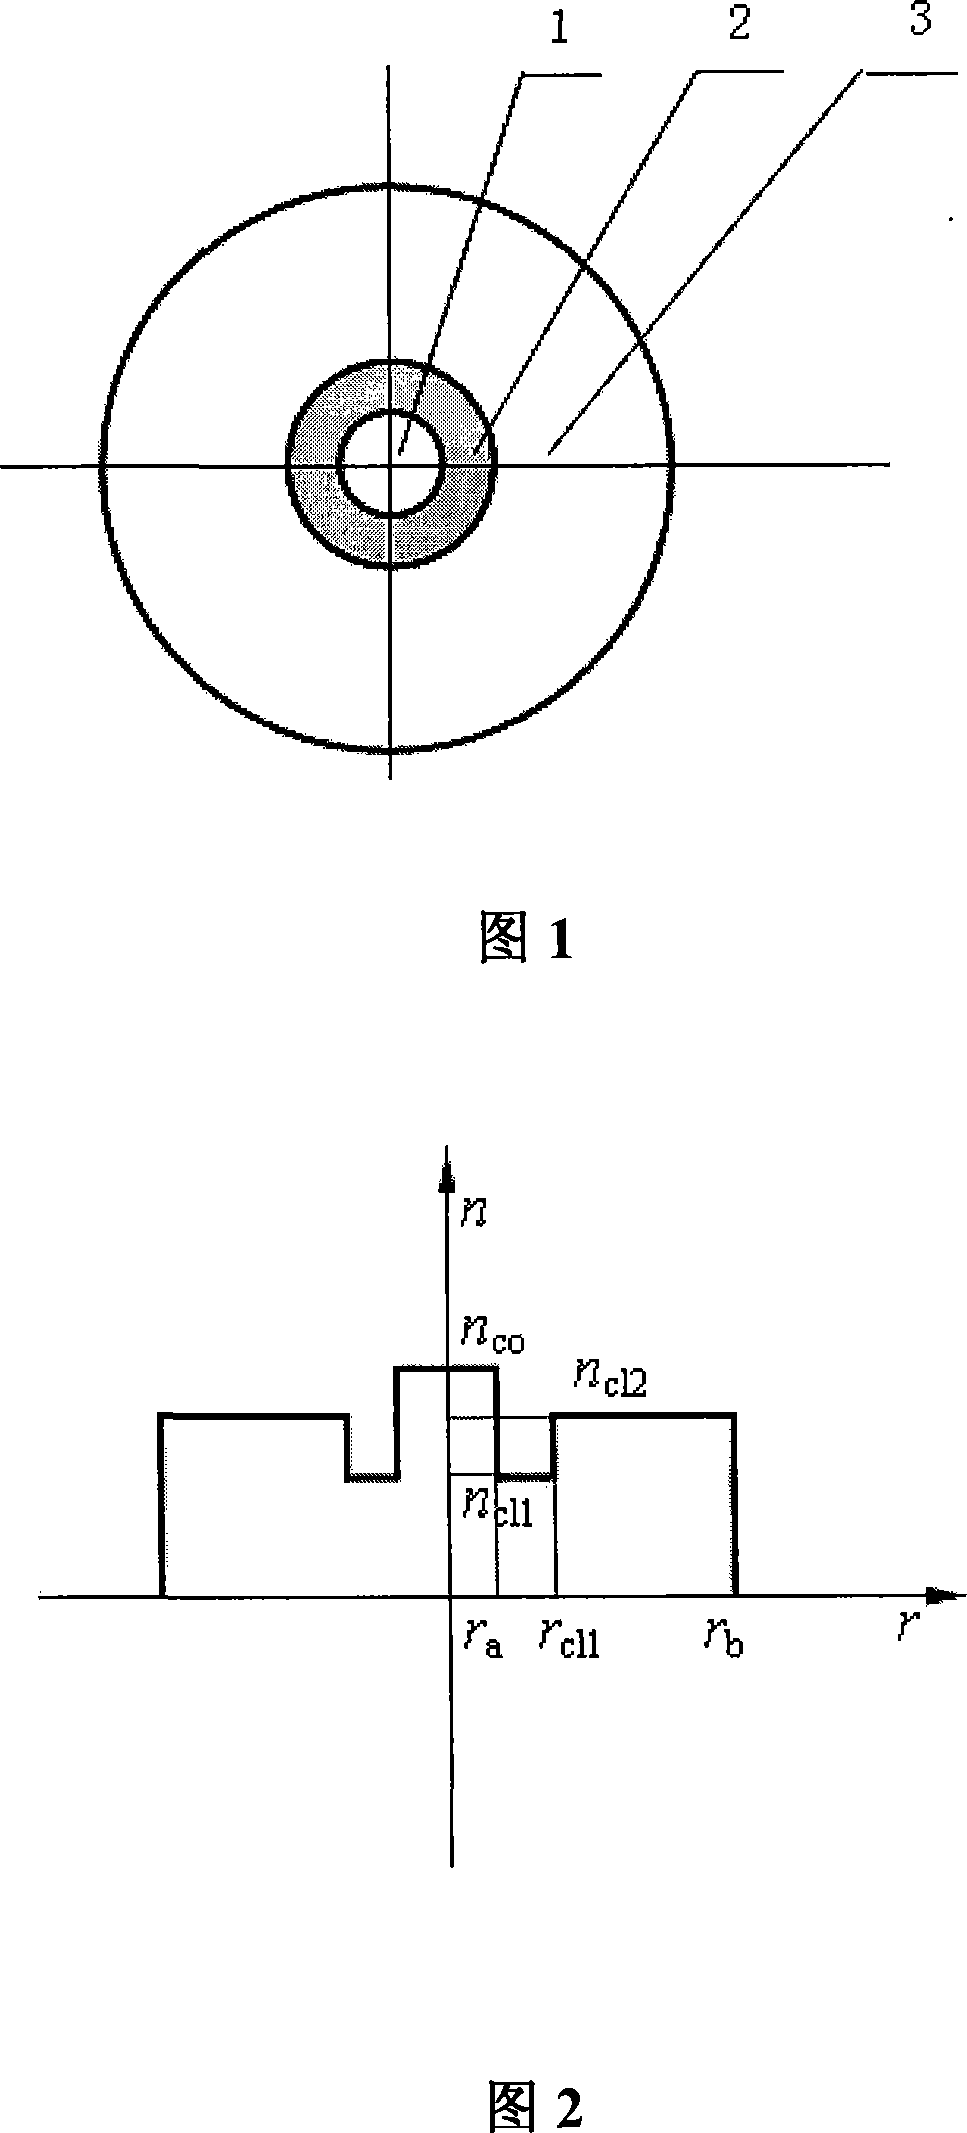 Single mode and multi-mode cladding mode interference special type optical fibre and method for making same